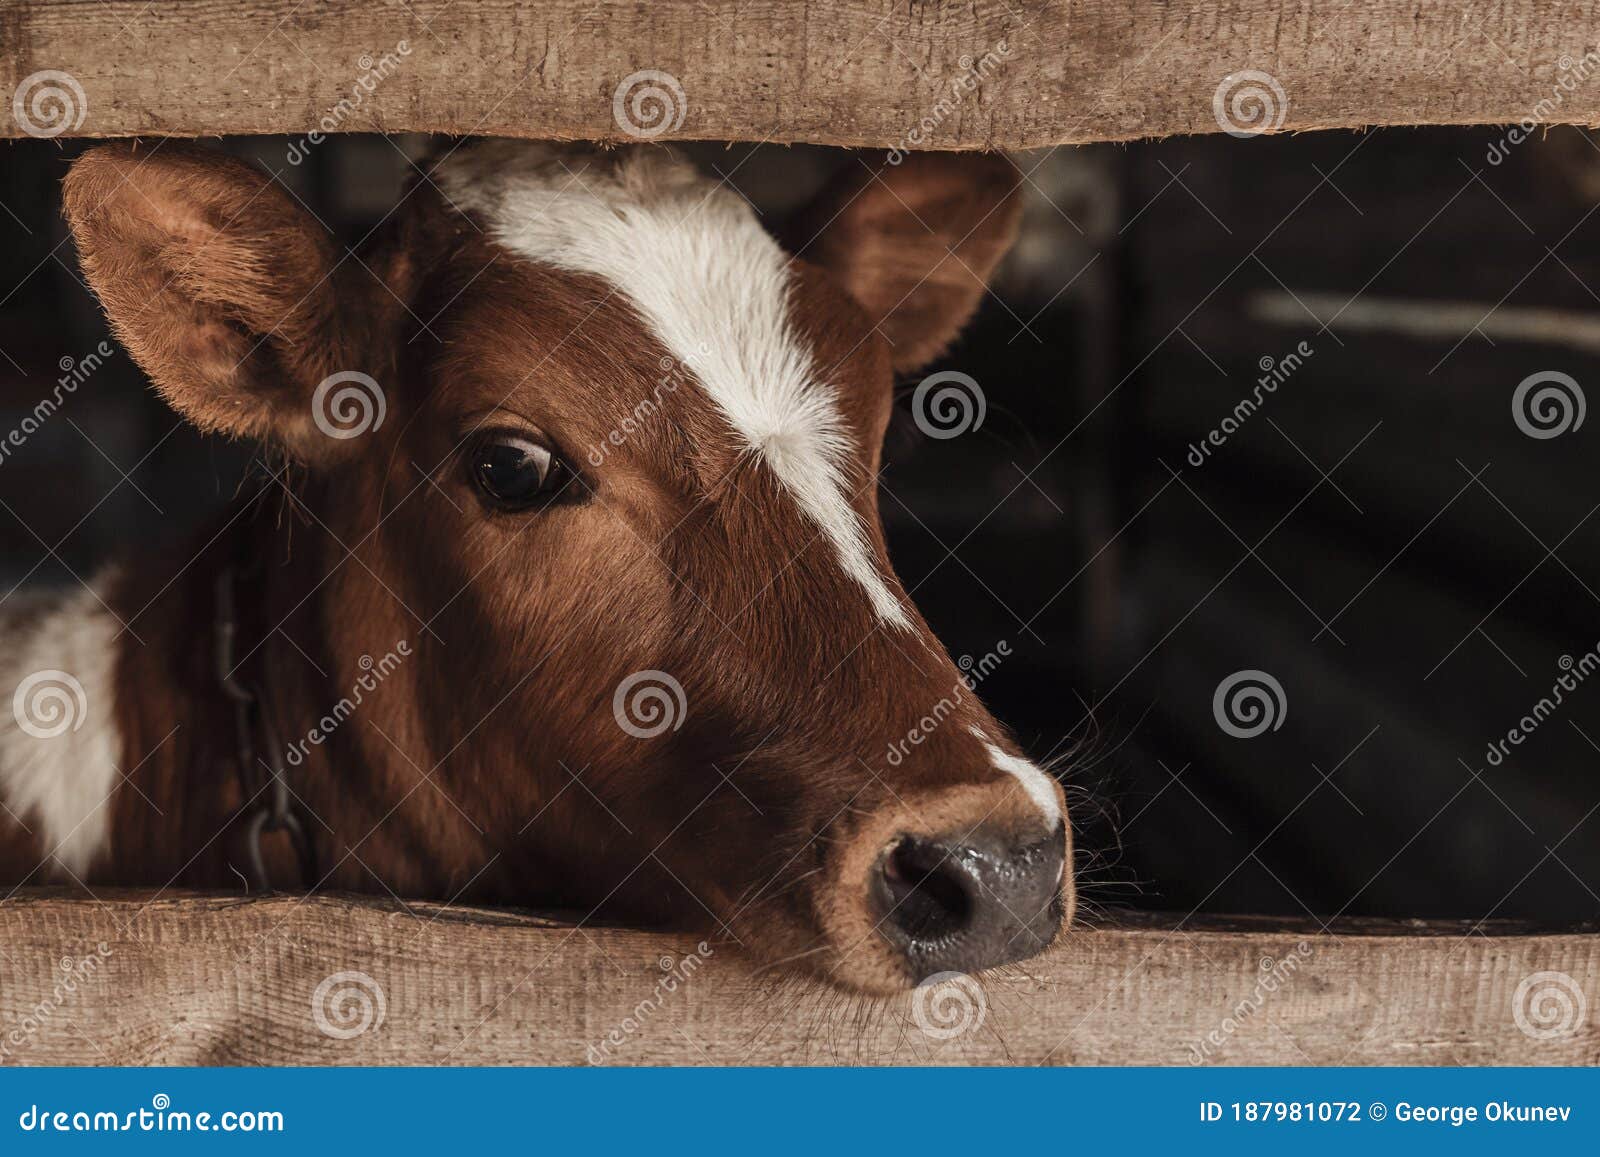 Portrait of a Brown Cow with a White Spot on Its Face Close Up. Stock ...